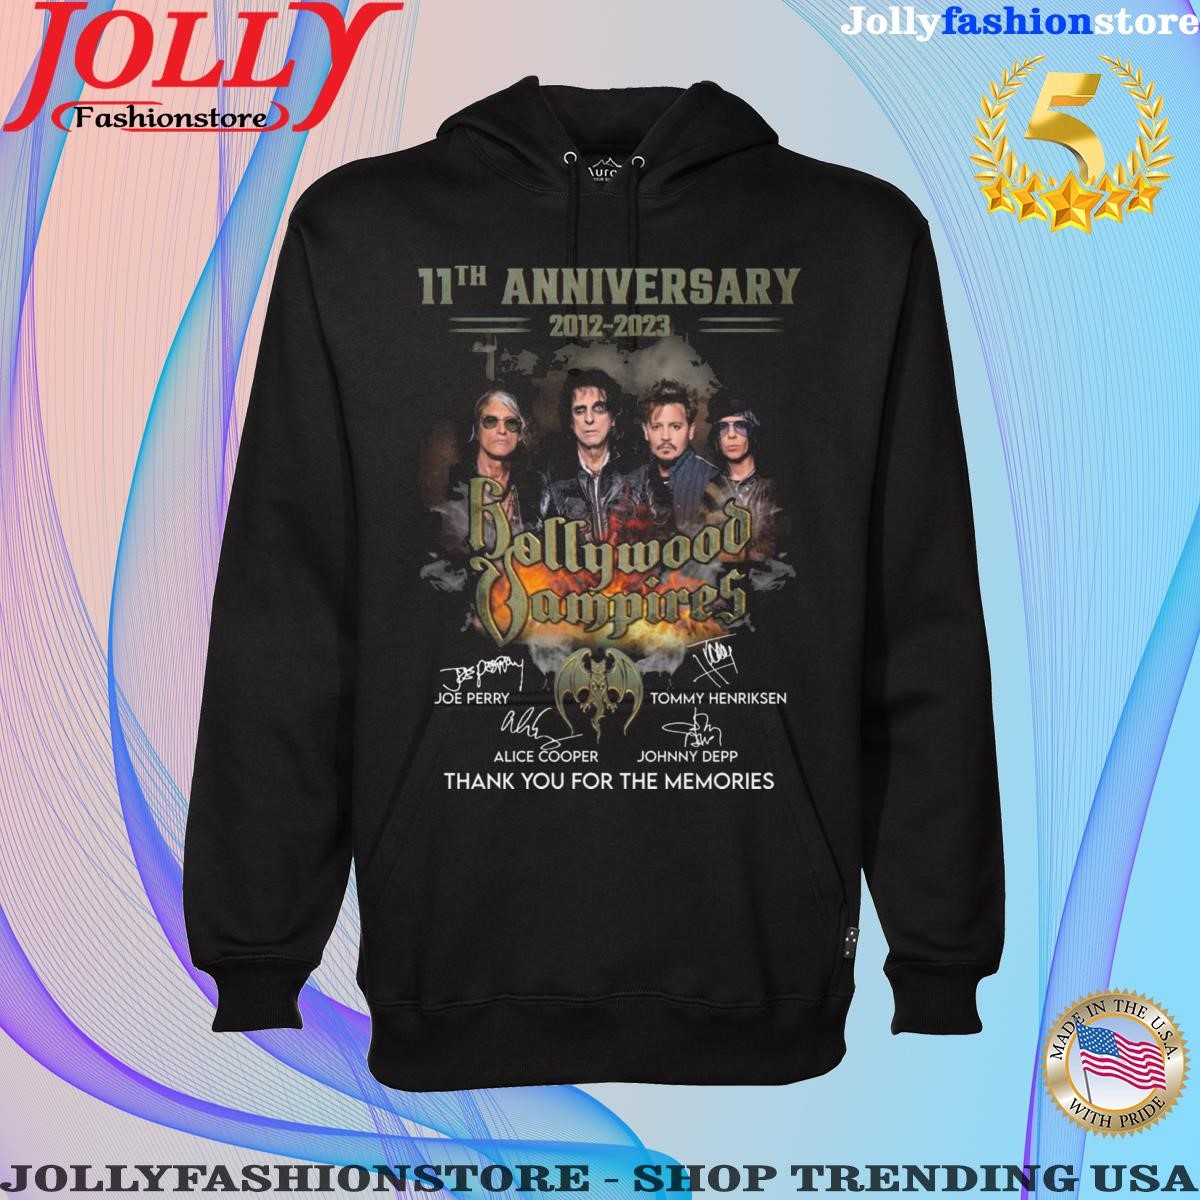 11th anniversary 2012 2023 bollywood vampires thank you for the memories signatures shirt Hoodie shirt.png